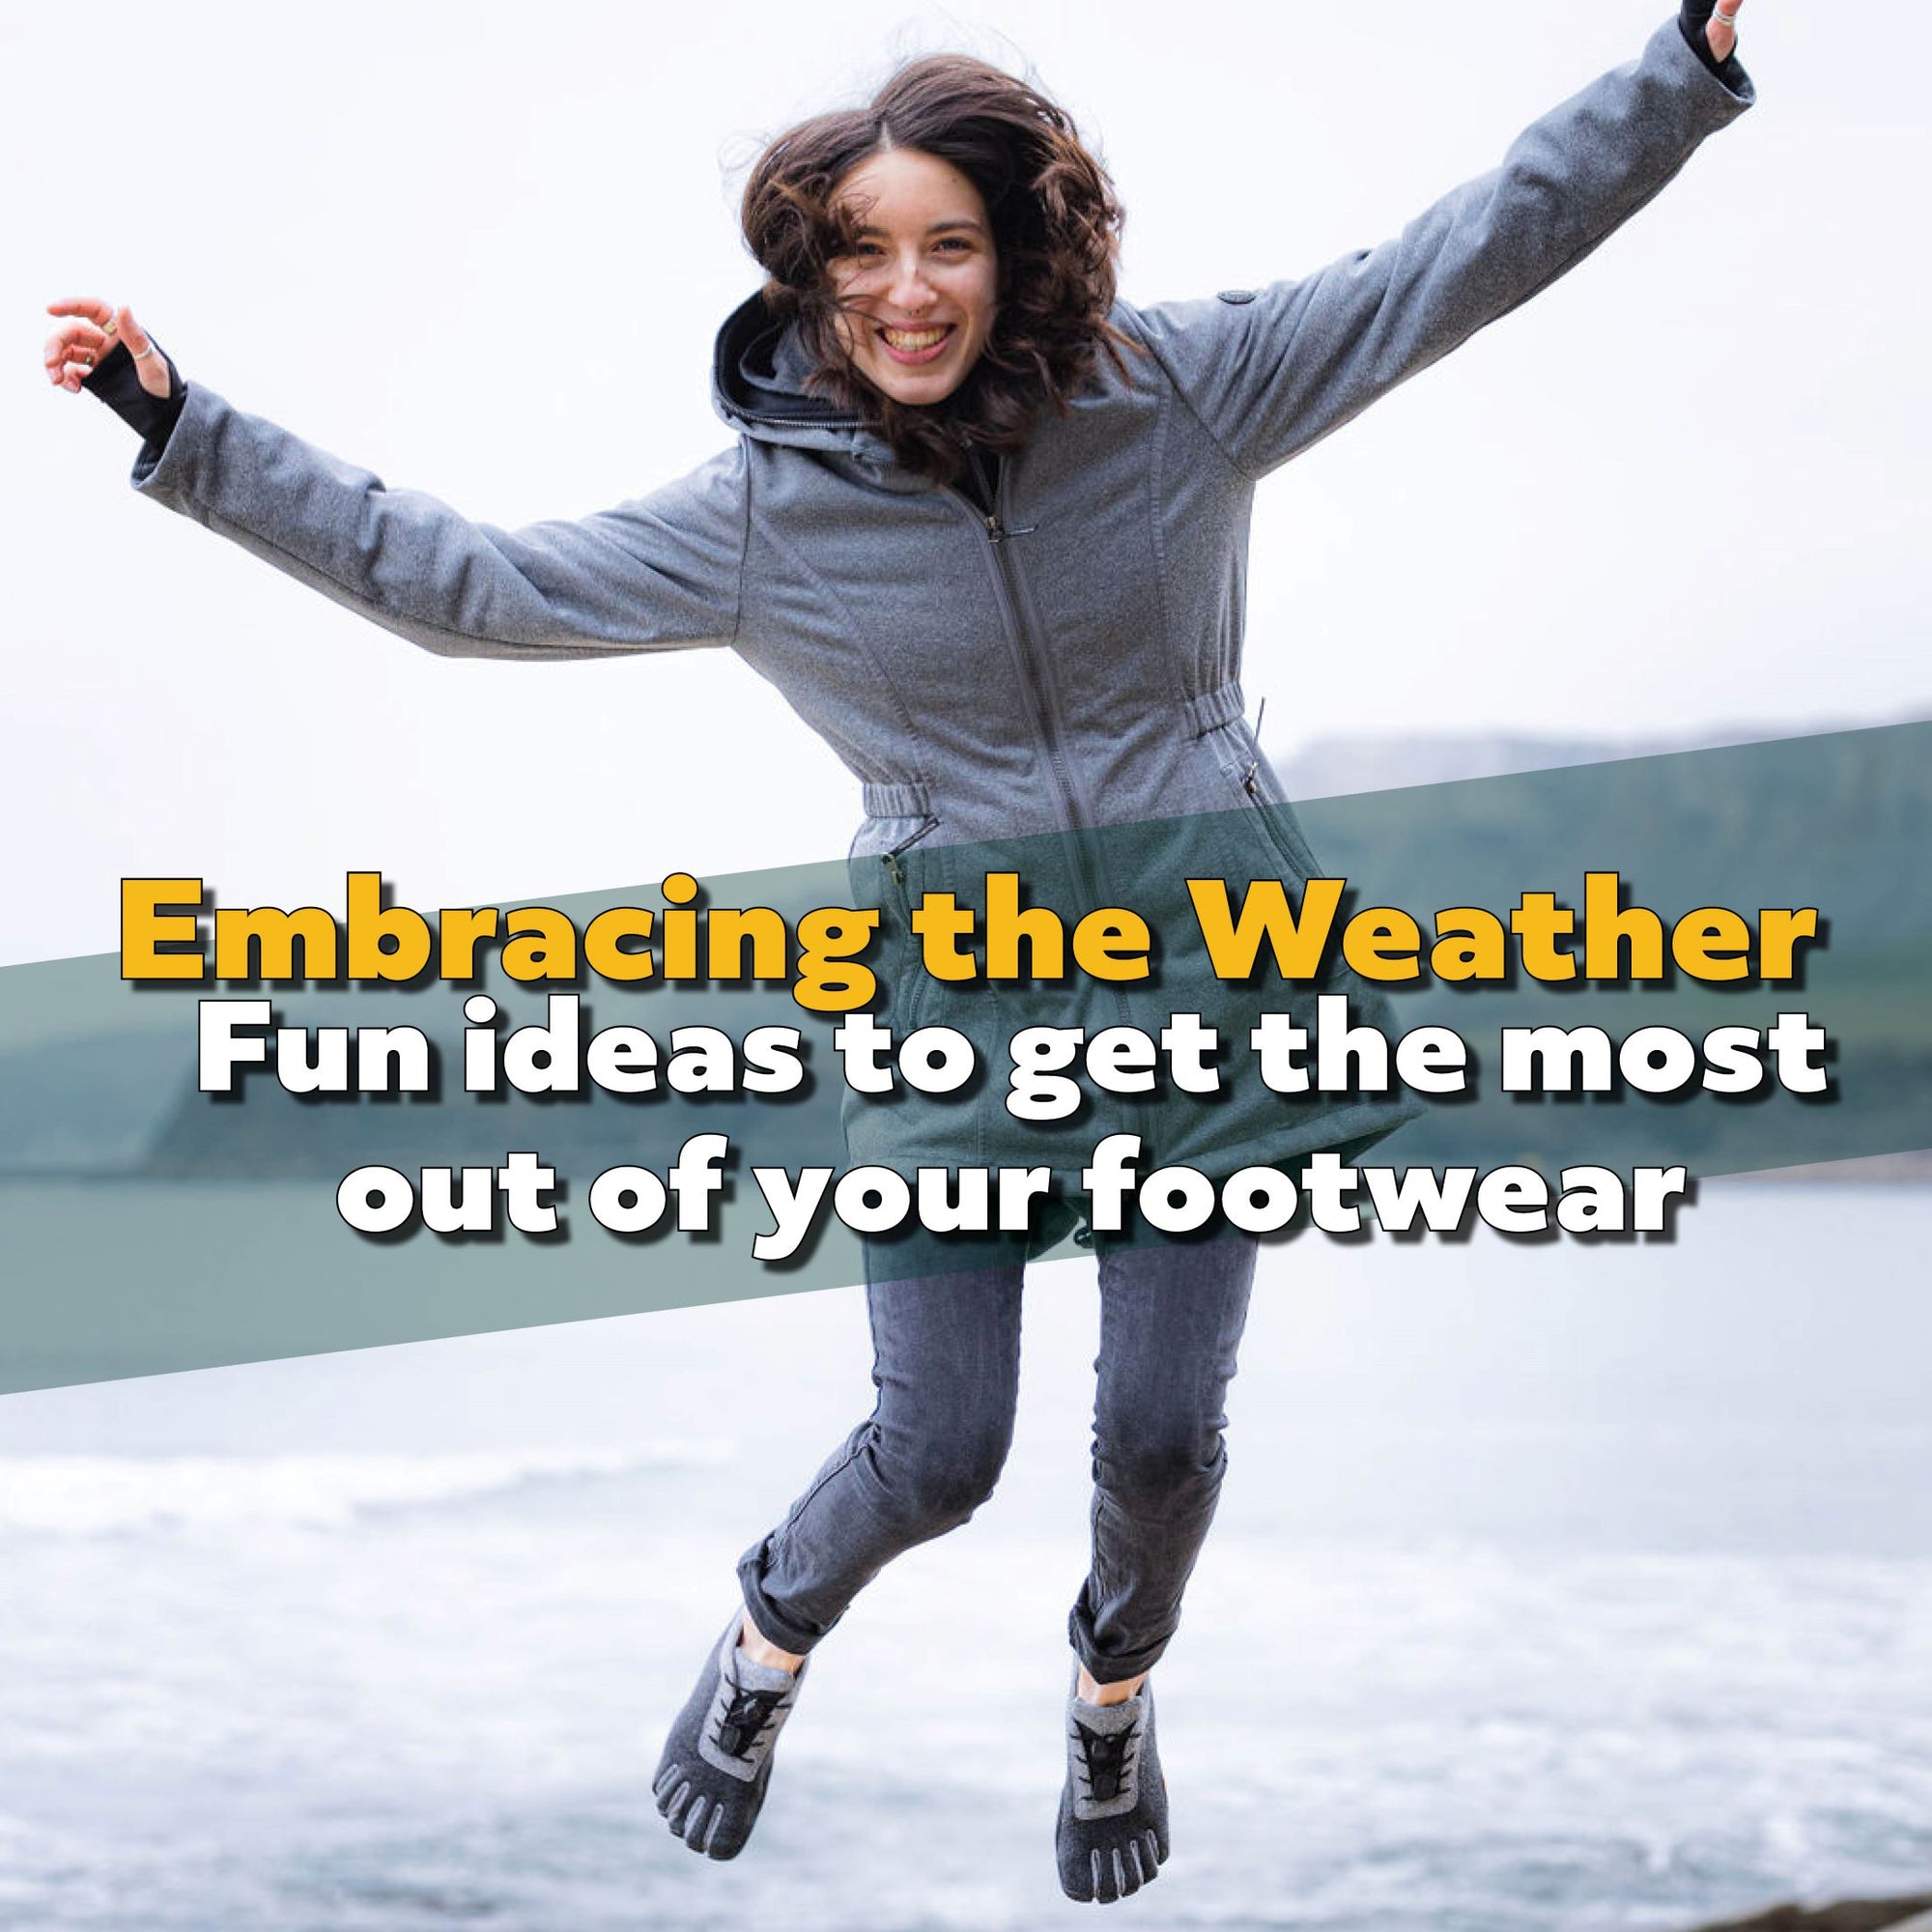 Embracing Unseasonal Weather: Fun Ideas to Make the Most of Your Vibram FiveFingers